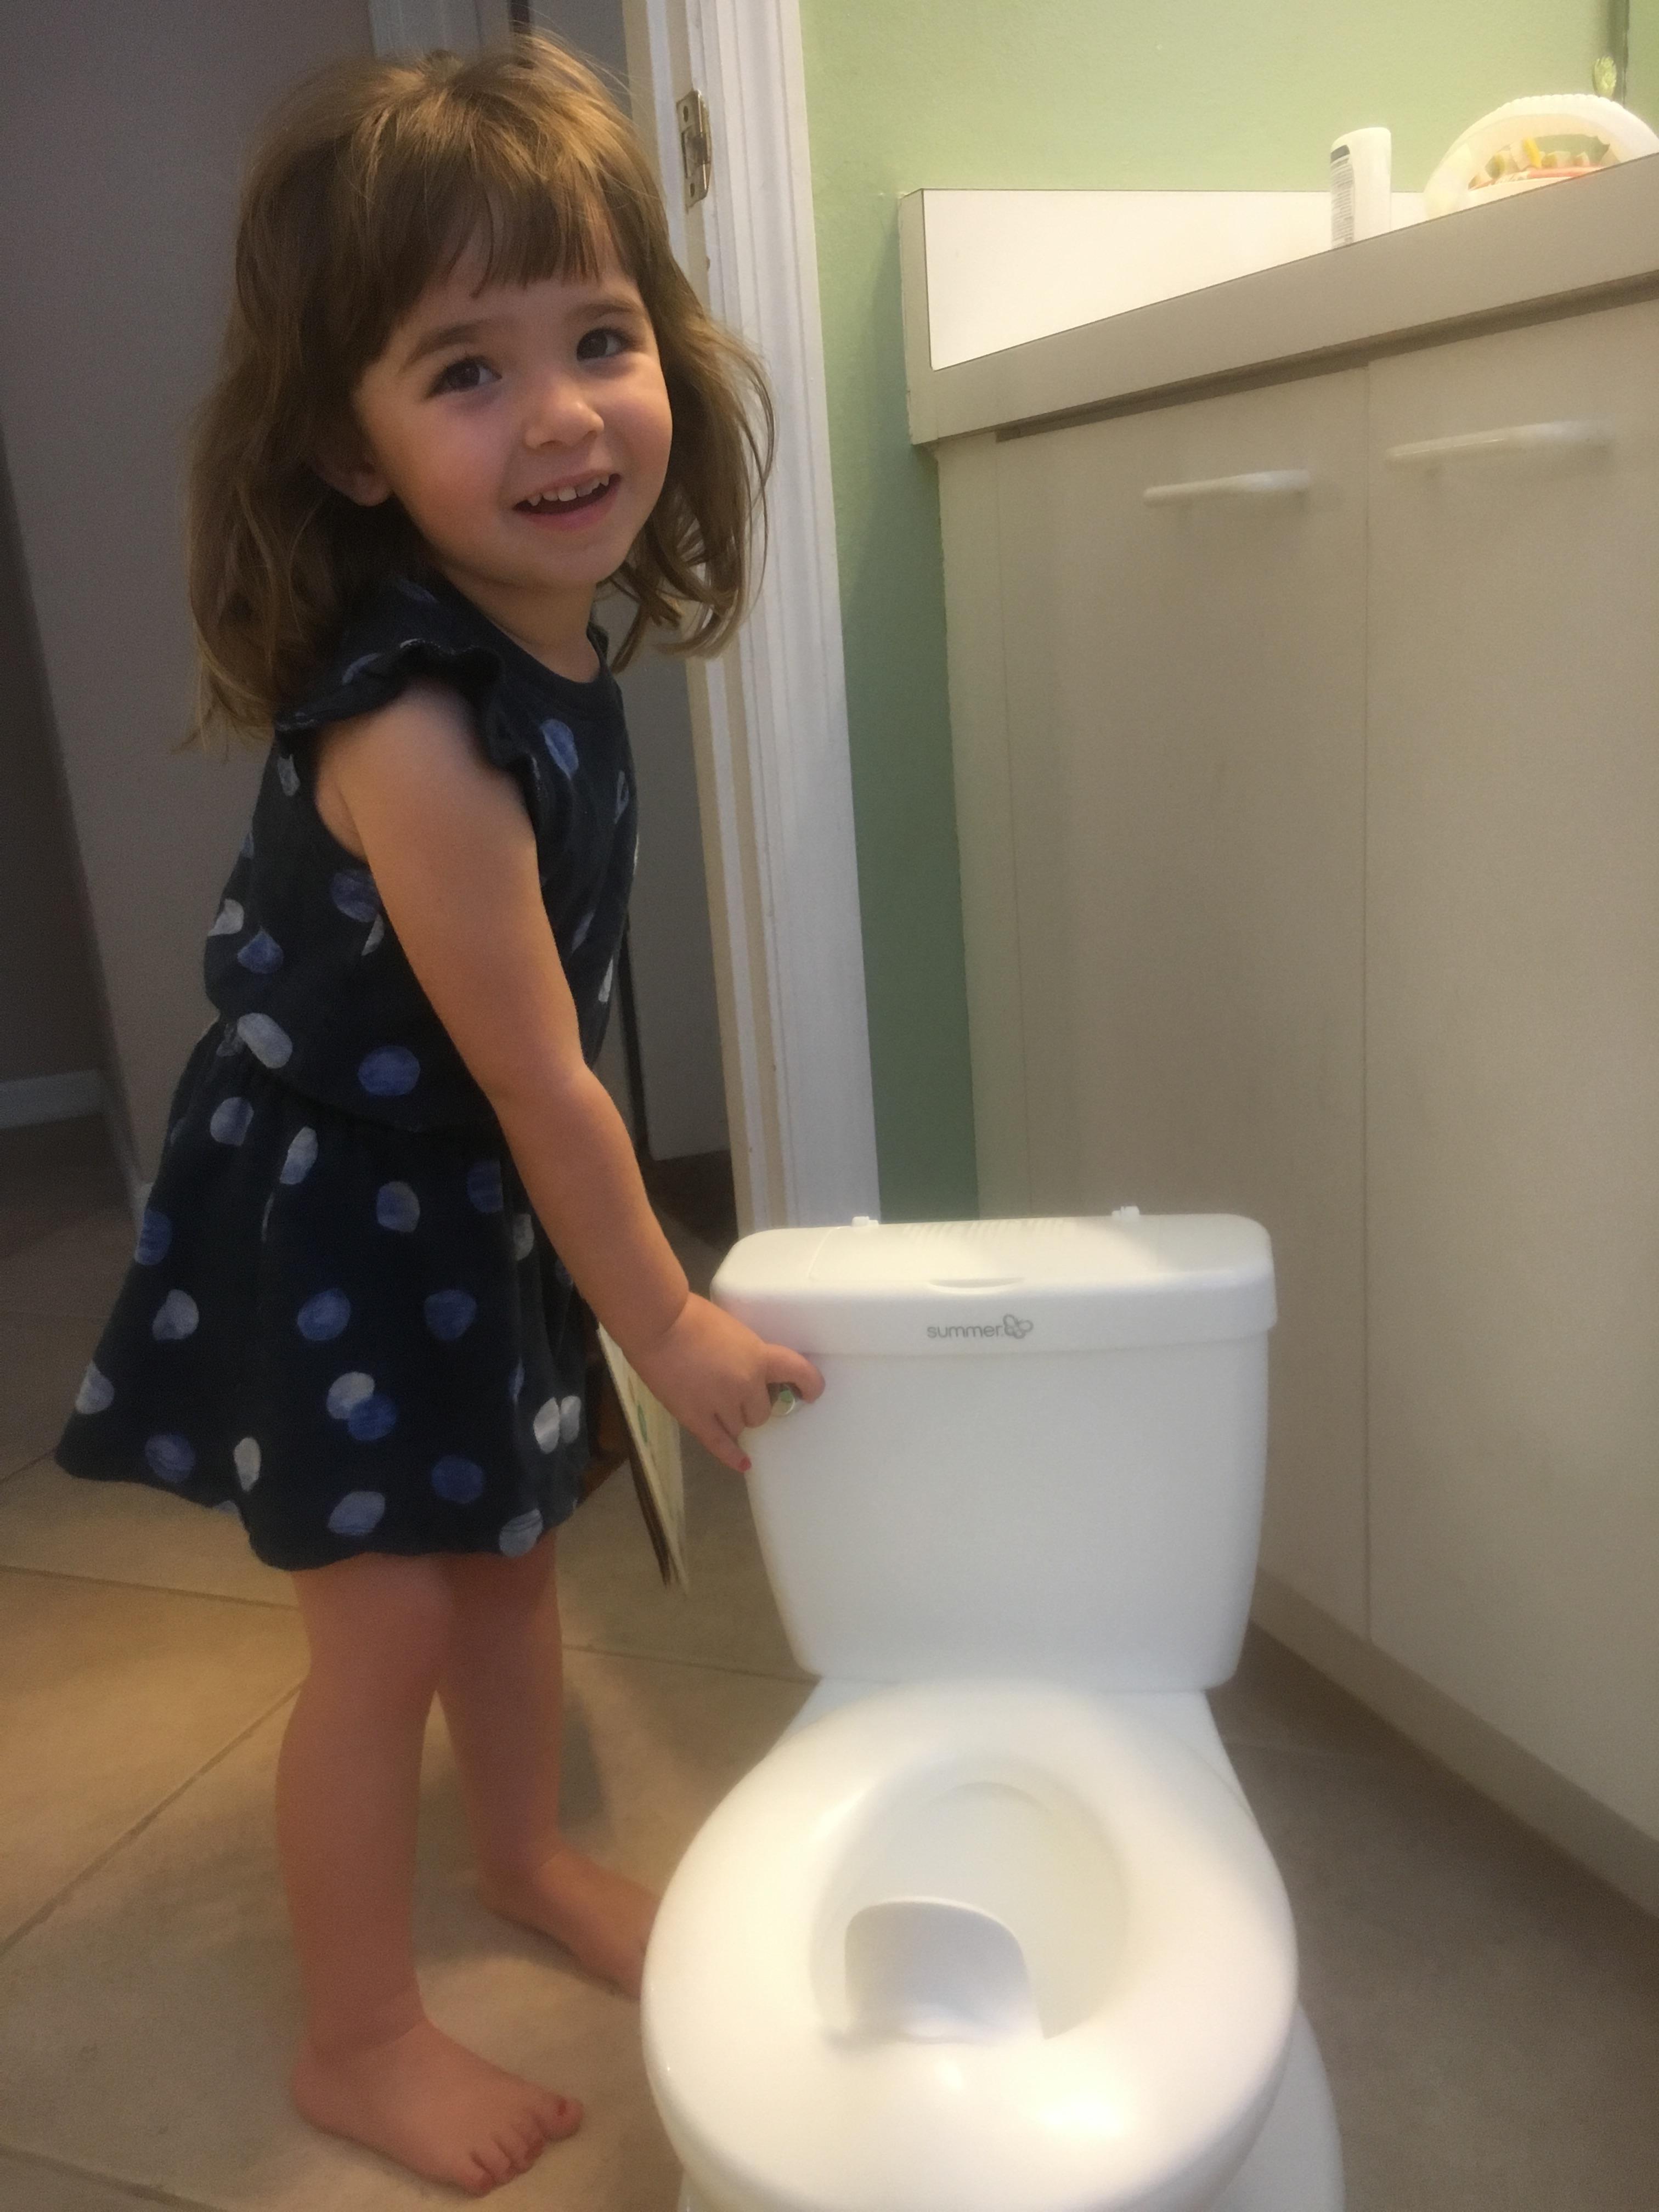 potty-training-made-easy-with-summer-infant-s-my-size-potty-macaroni